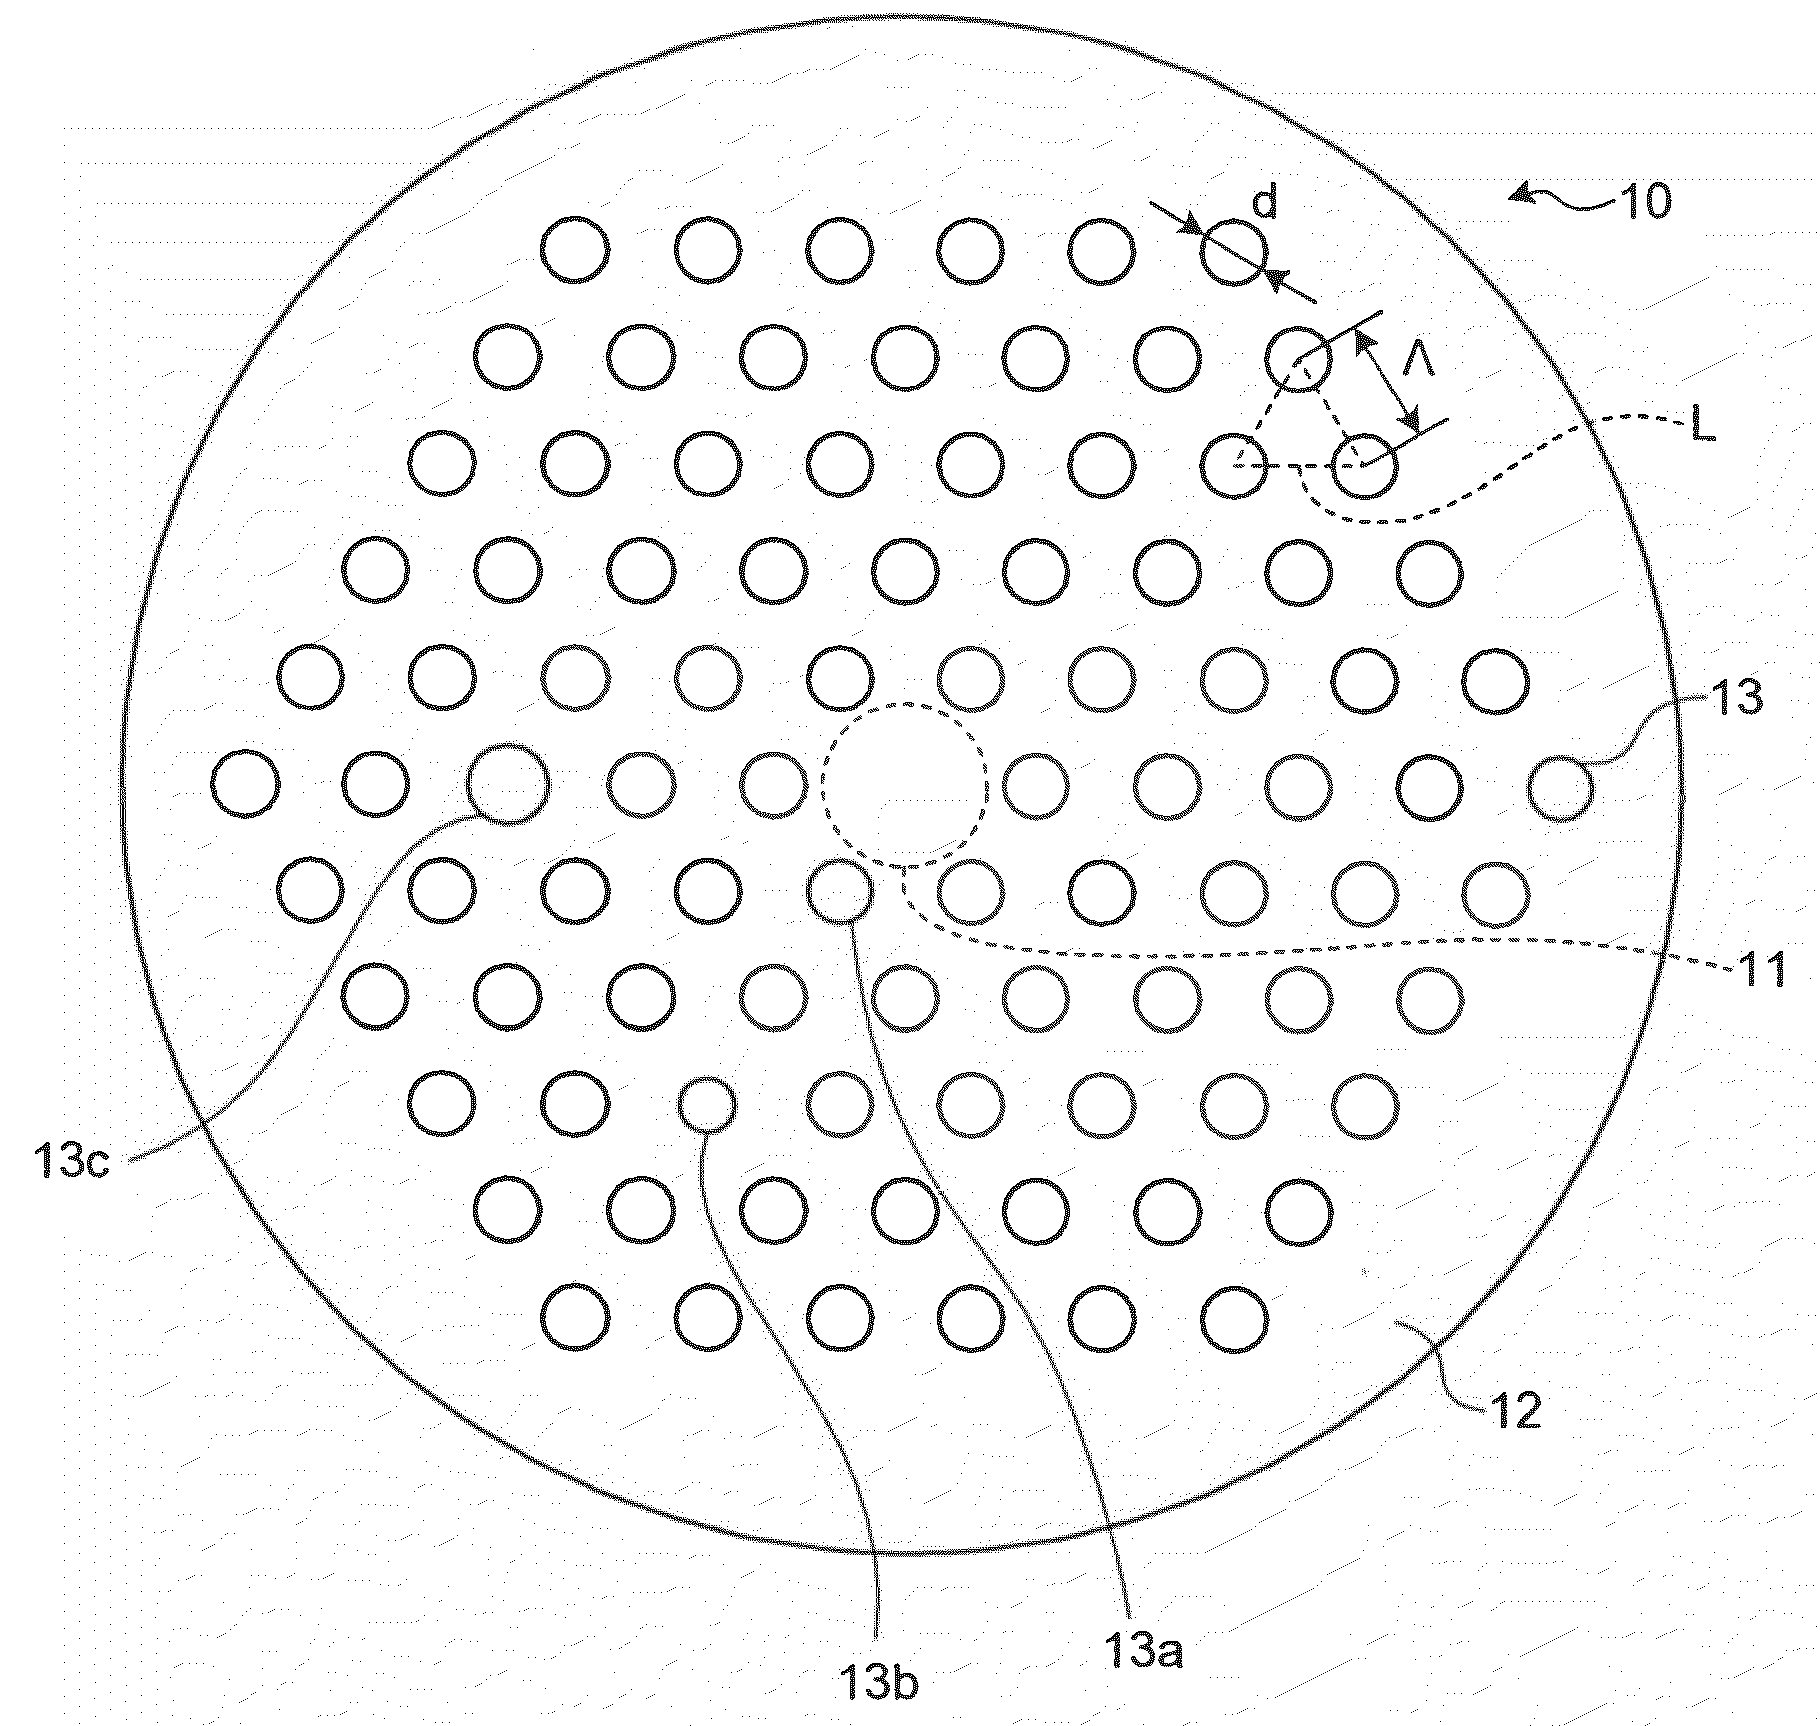 Holey fiber and method of manufacturing the same